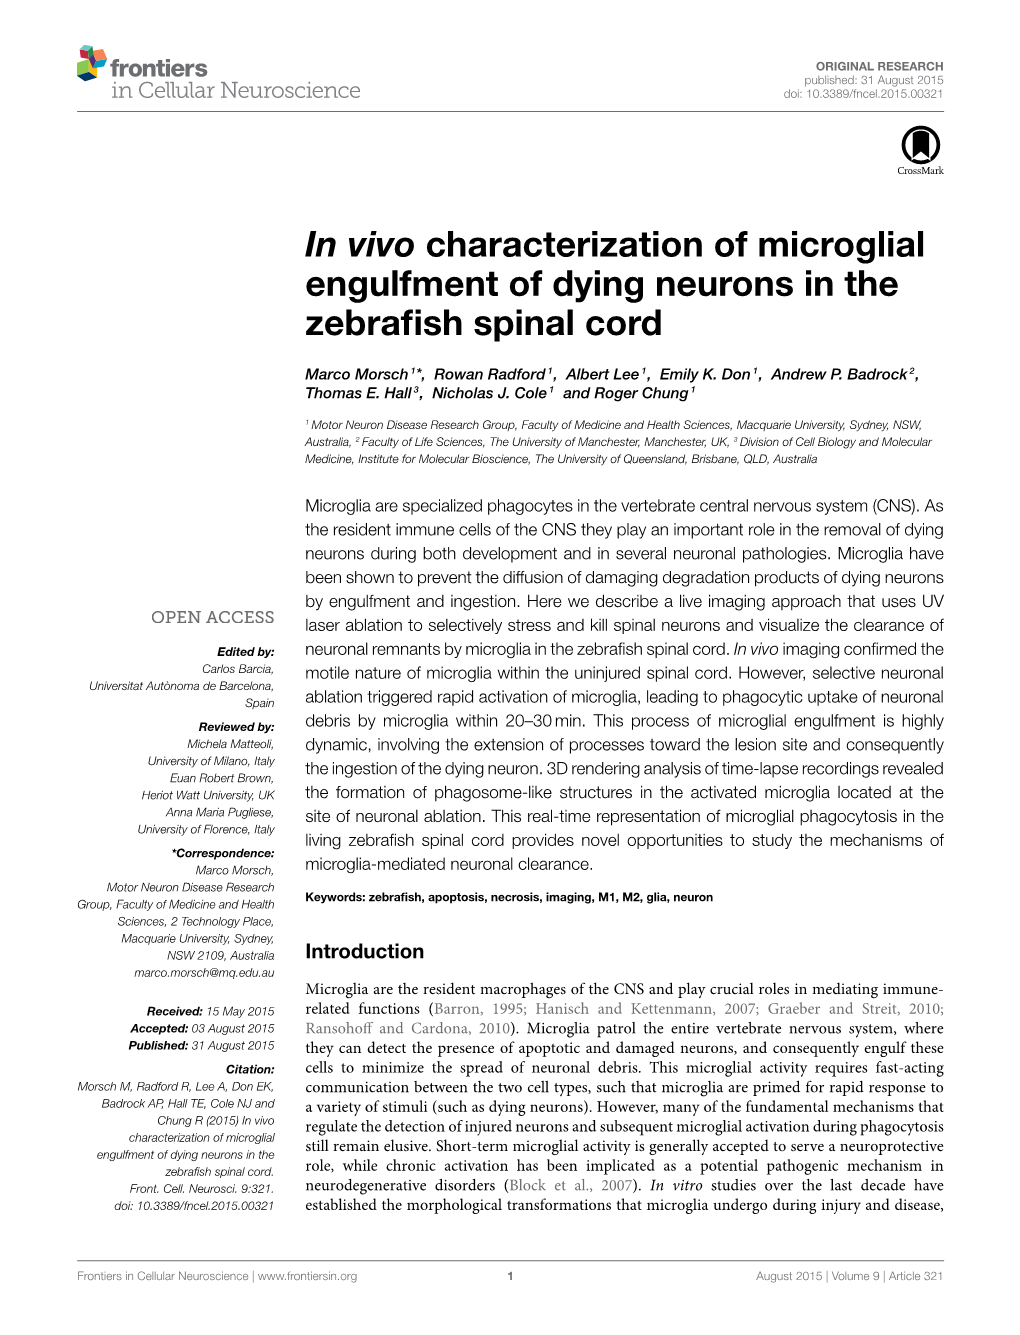 In Vivo Characterization of Microglial Engulfment of Dying Neurons in the Zebrafish Spinal Cord